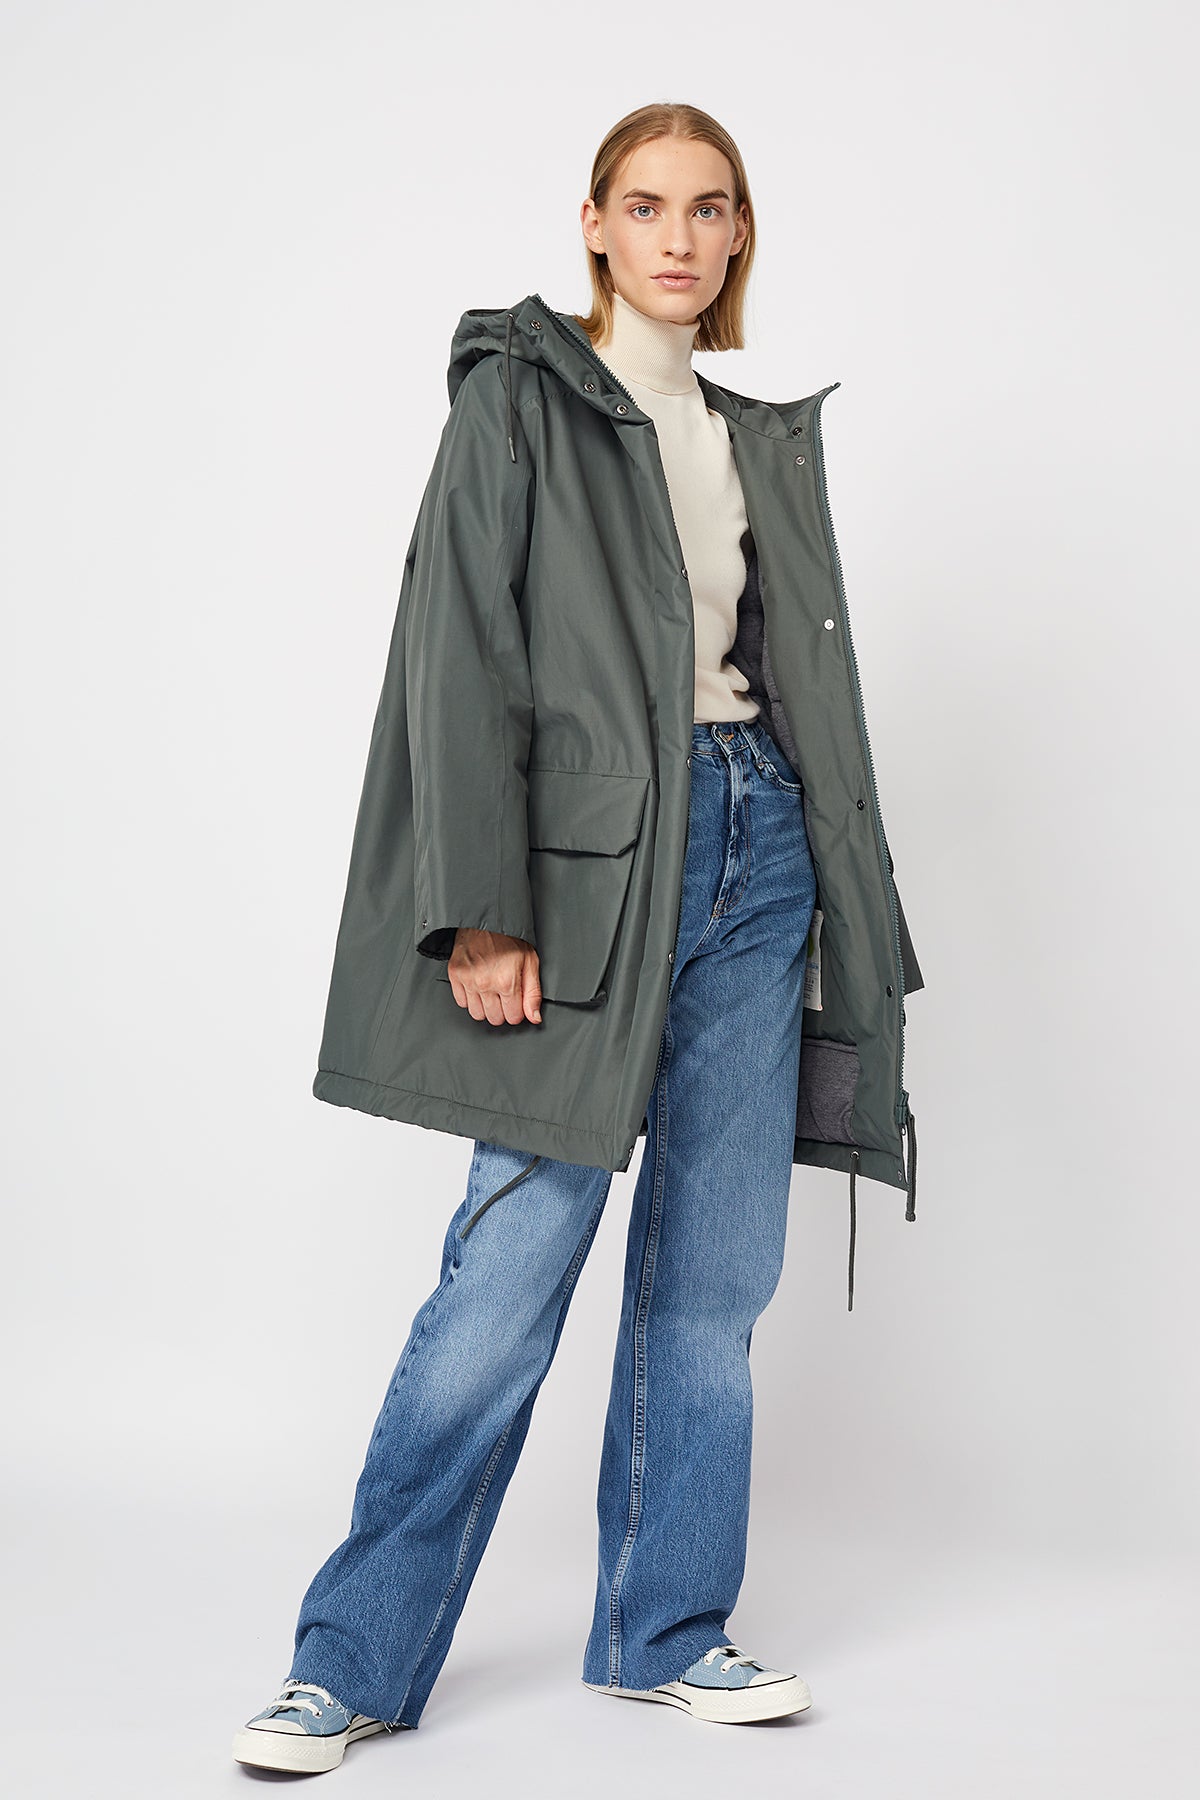 Jacket Parka Kinsey of the fashion label LangerChen in the color Fir, fair  made from sustainable materials